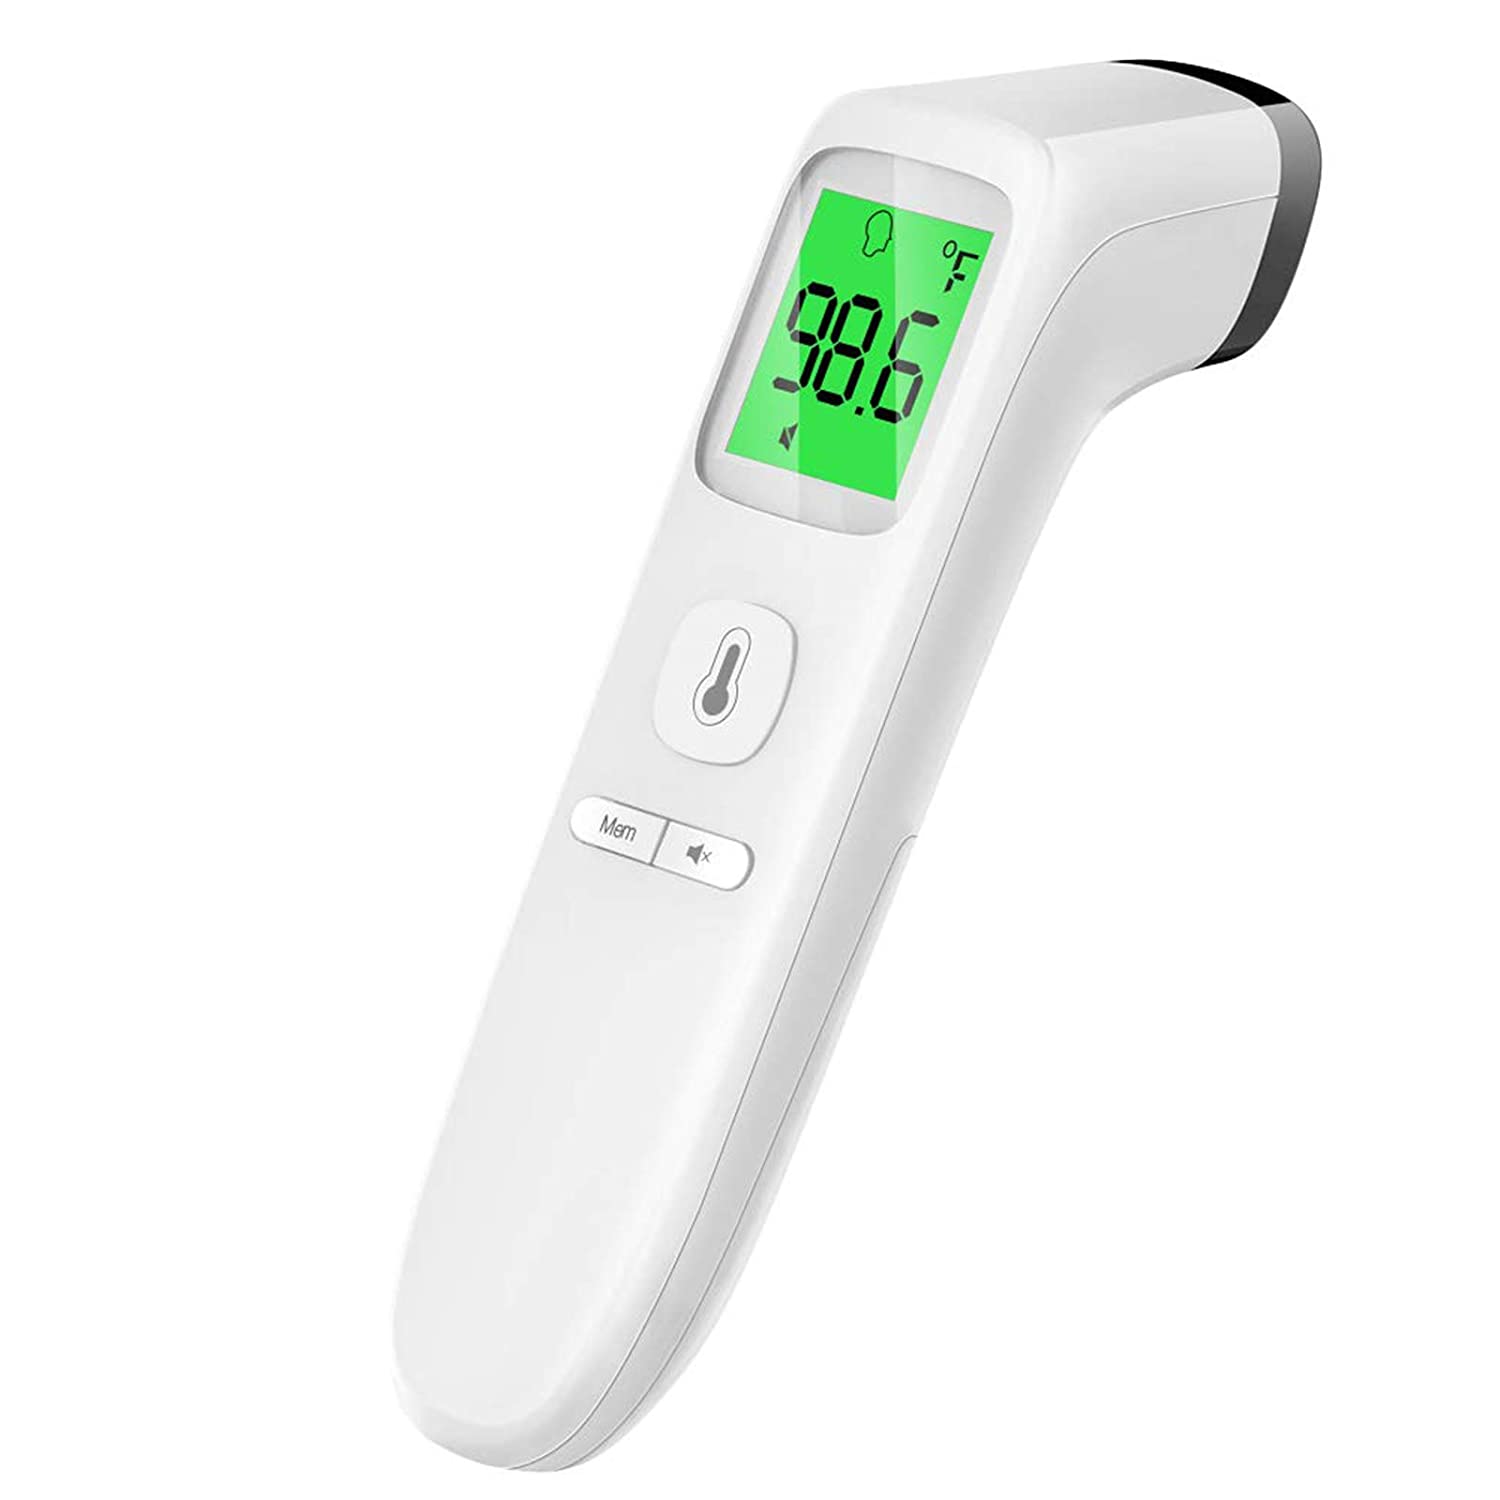 Touchless Thermometer for Adults and Babies $9.34